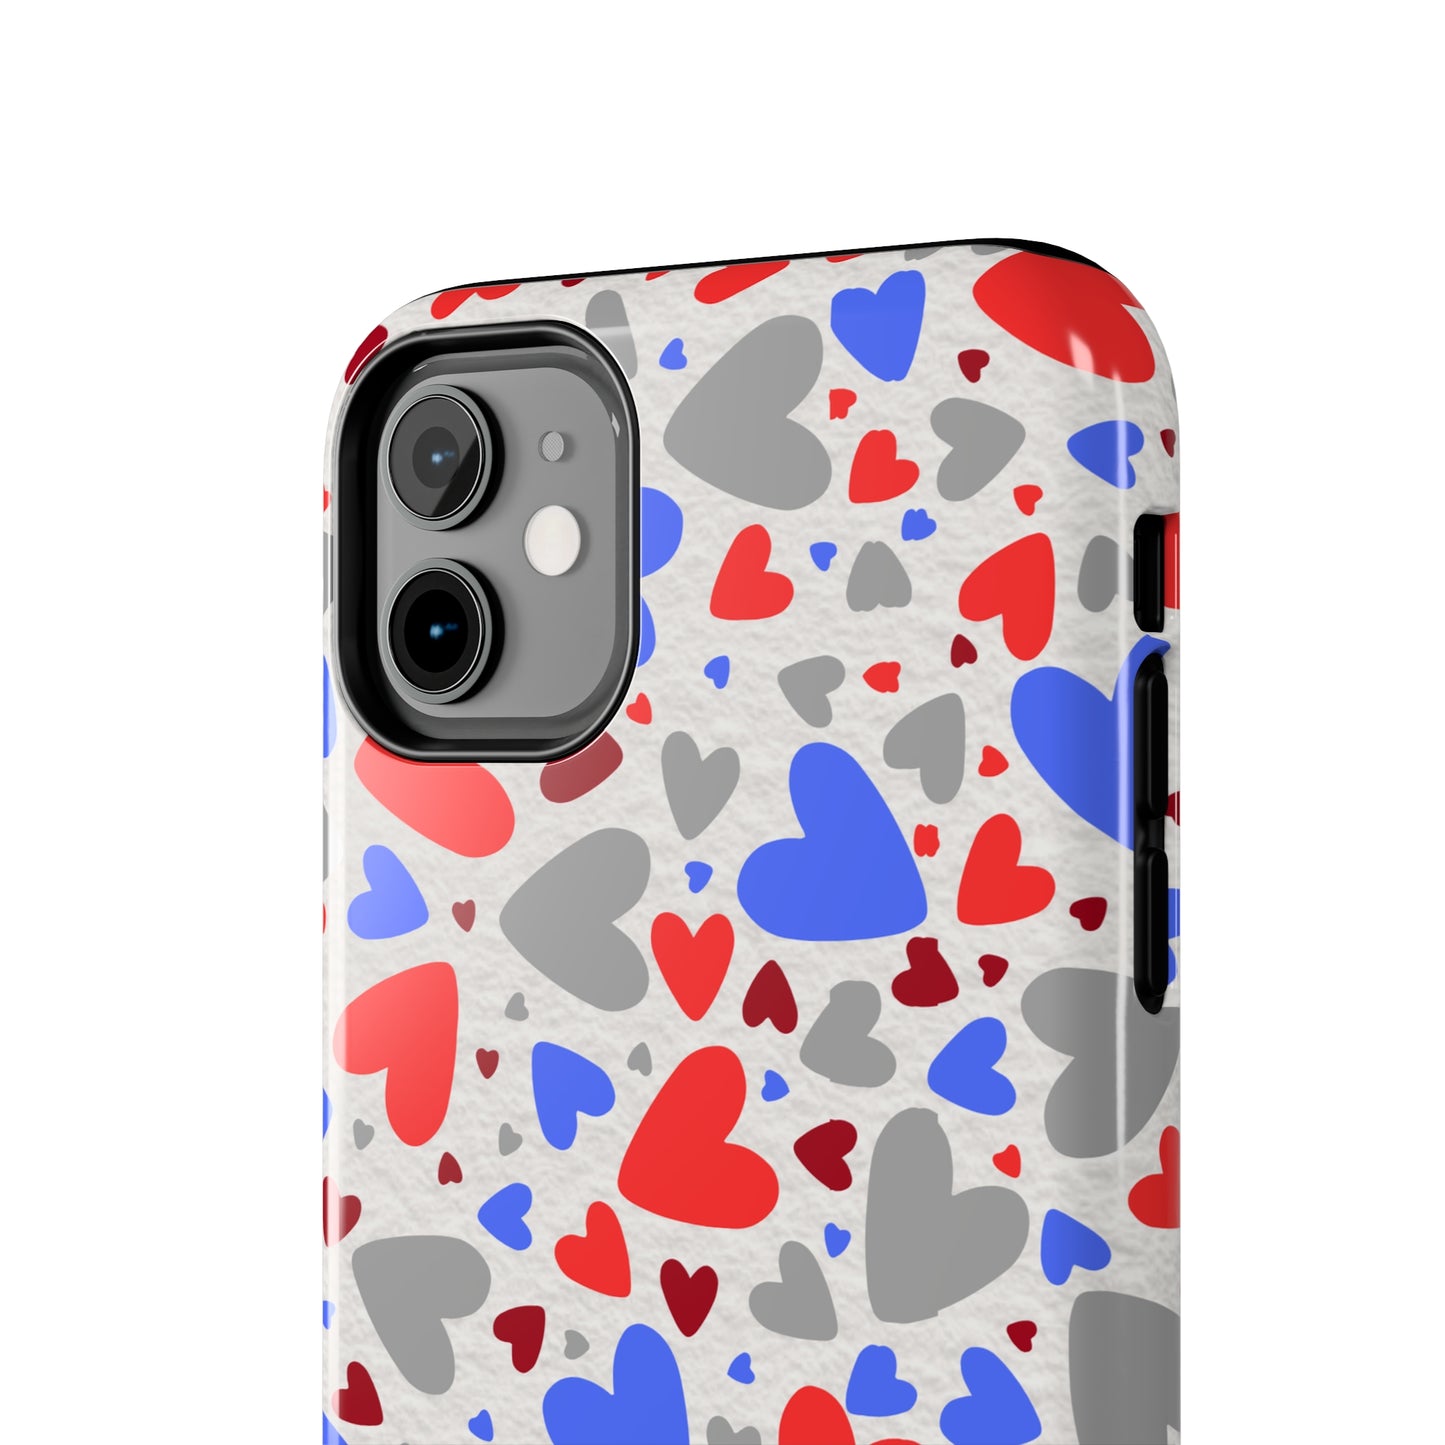 Full of Hearts -Tough Phone Cases